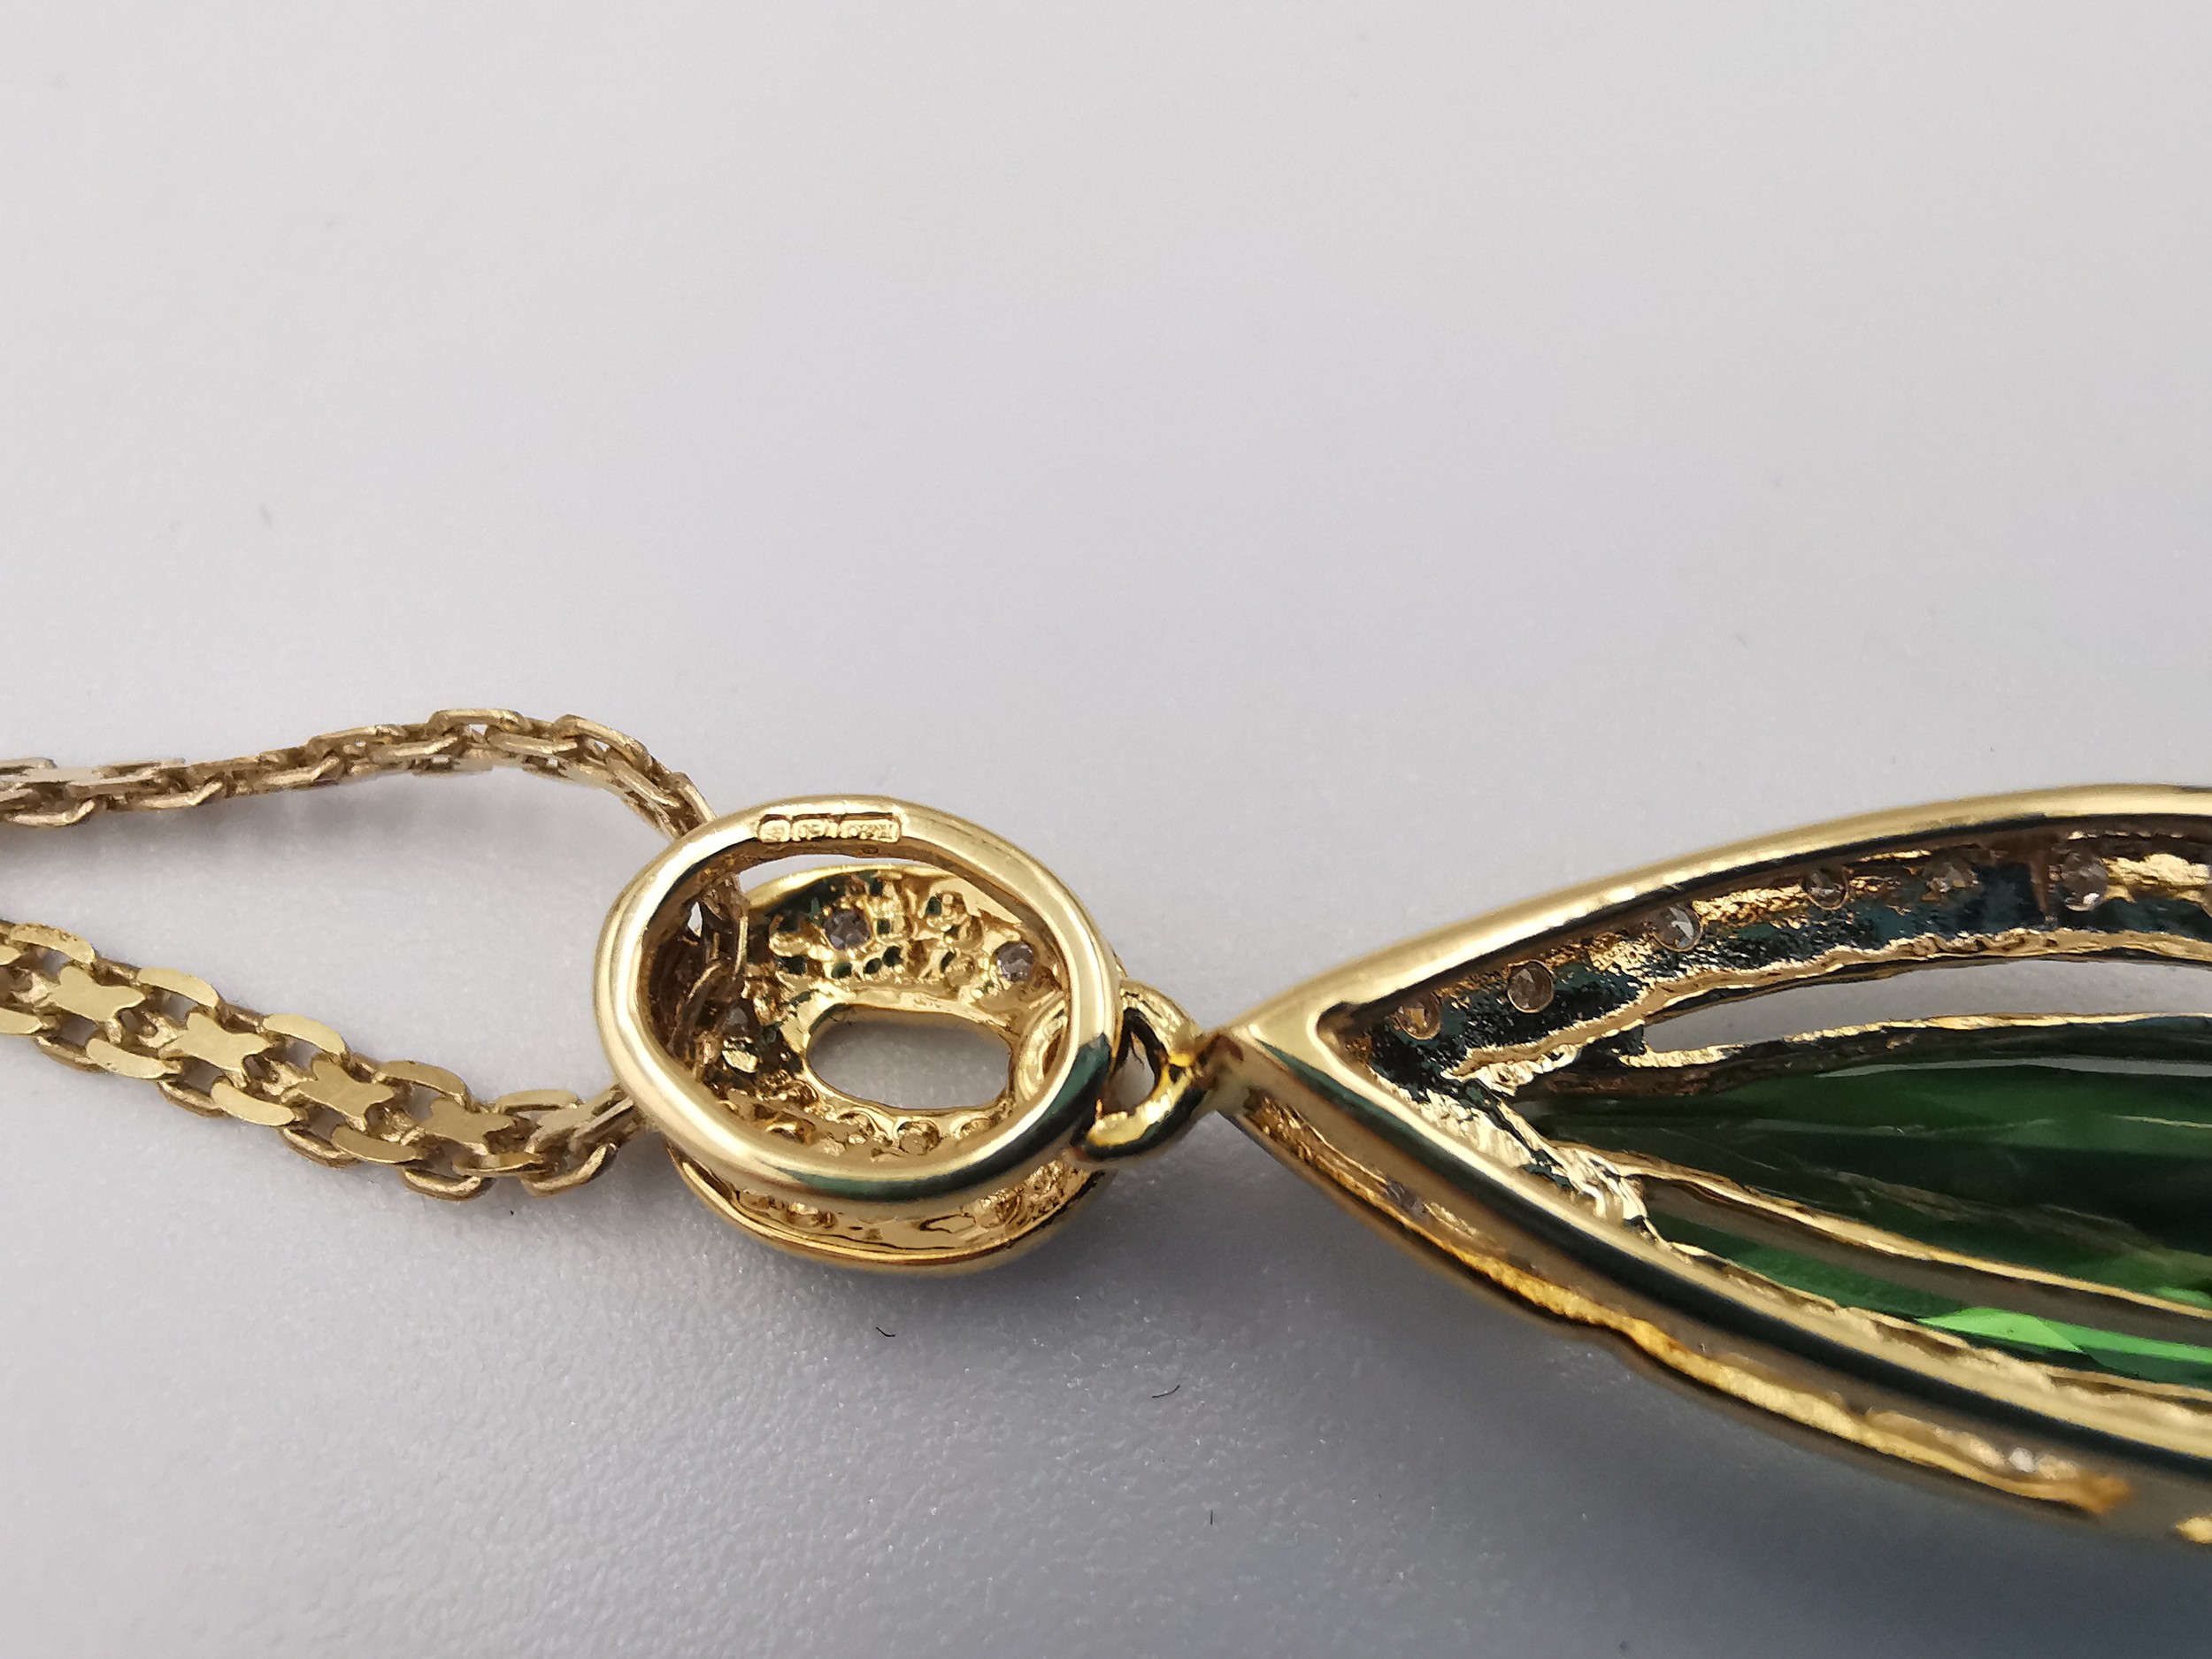 A cased 18 carat diamond and Santa Rosa tourmaline drop pendant on a gold plated silver rope - Image 7 of 9